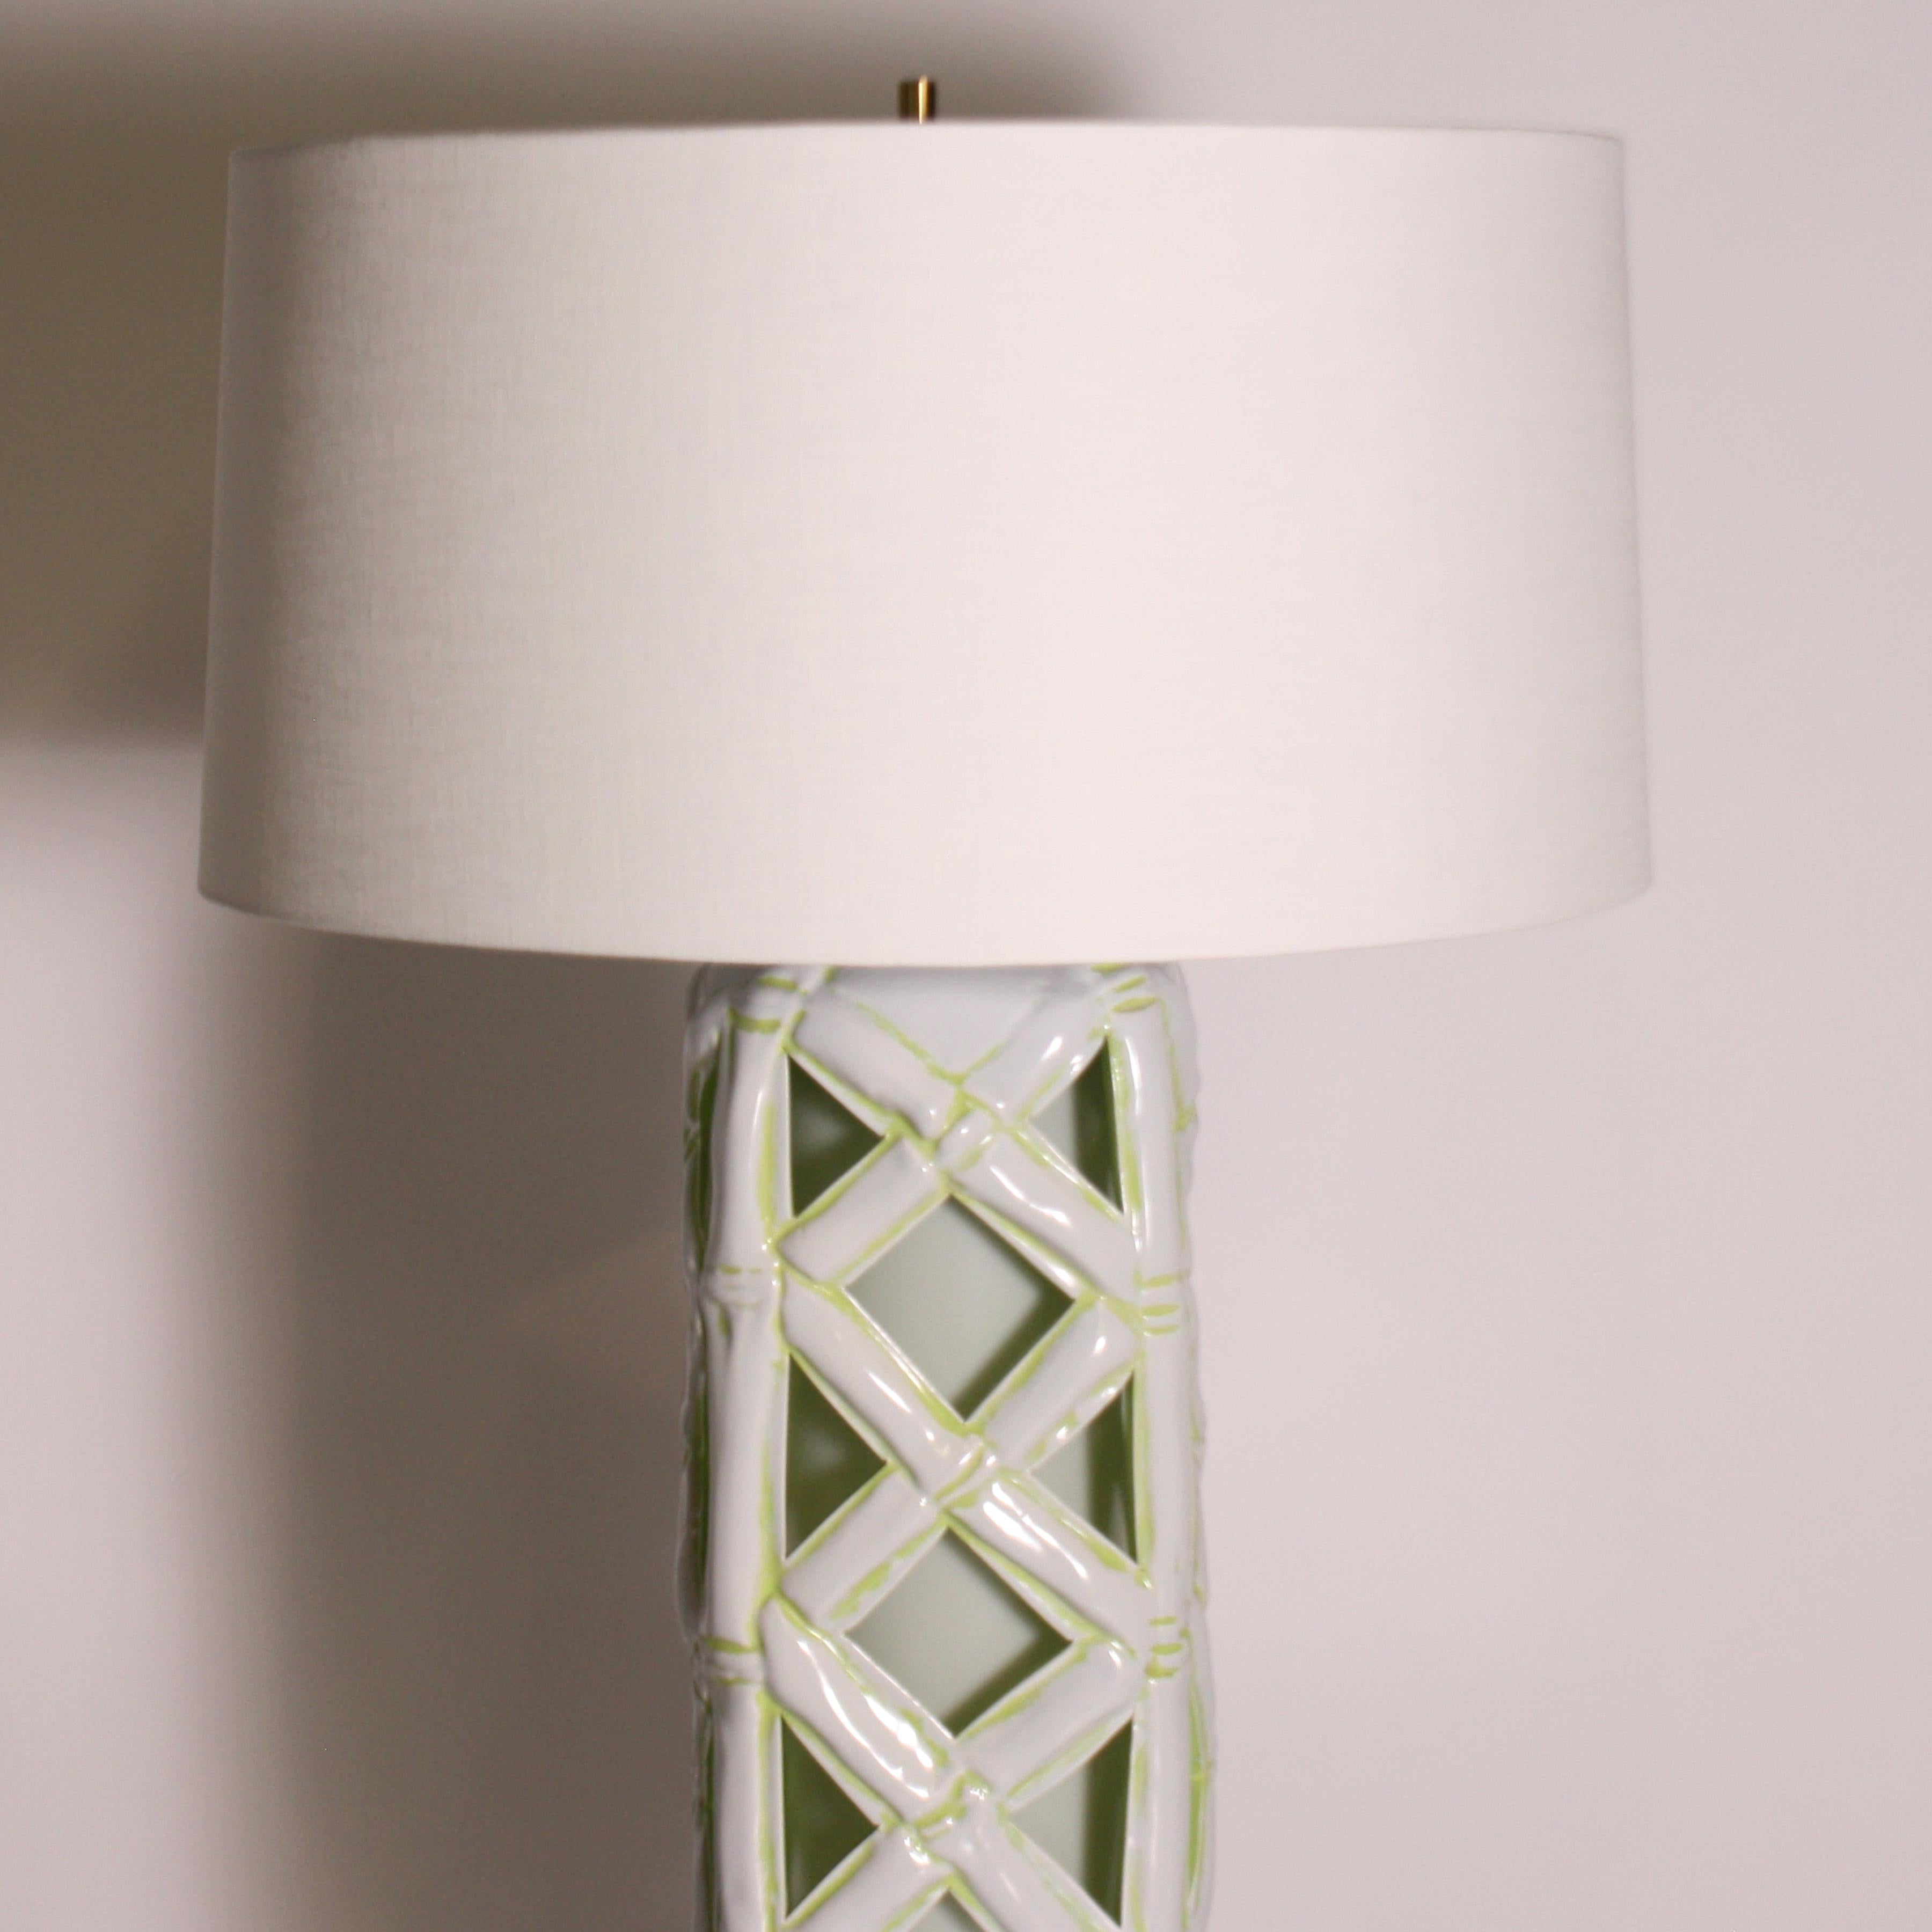 Ceramic Faux Bamboo Lamp, c. 1960 For Sale 1